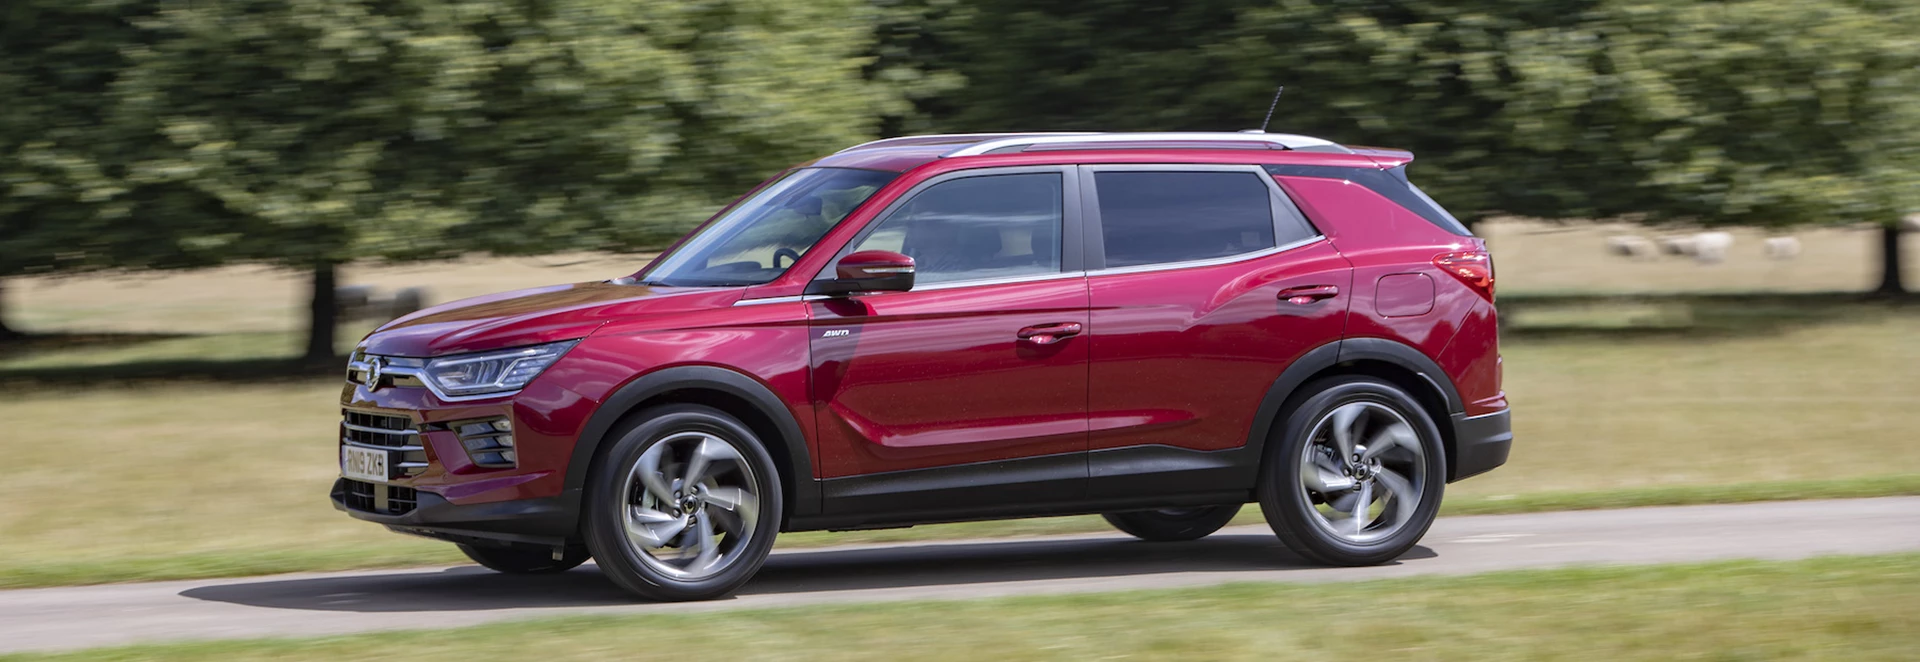 What’s new on the 2019 SsangYong Korando?